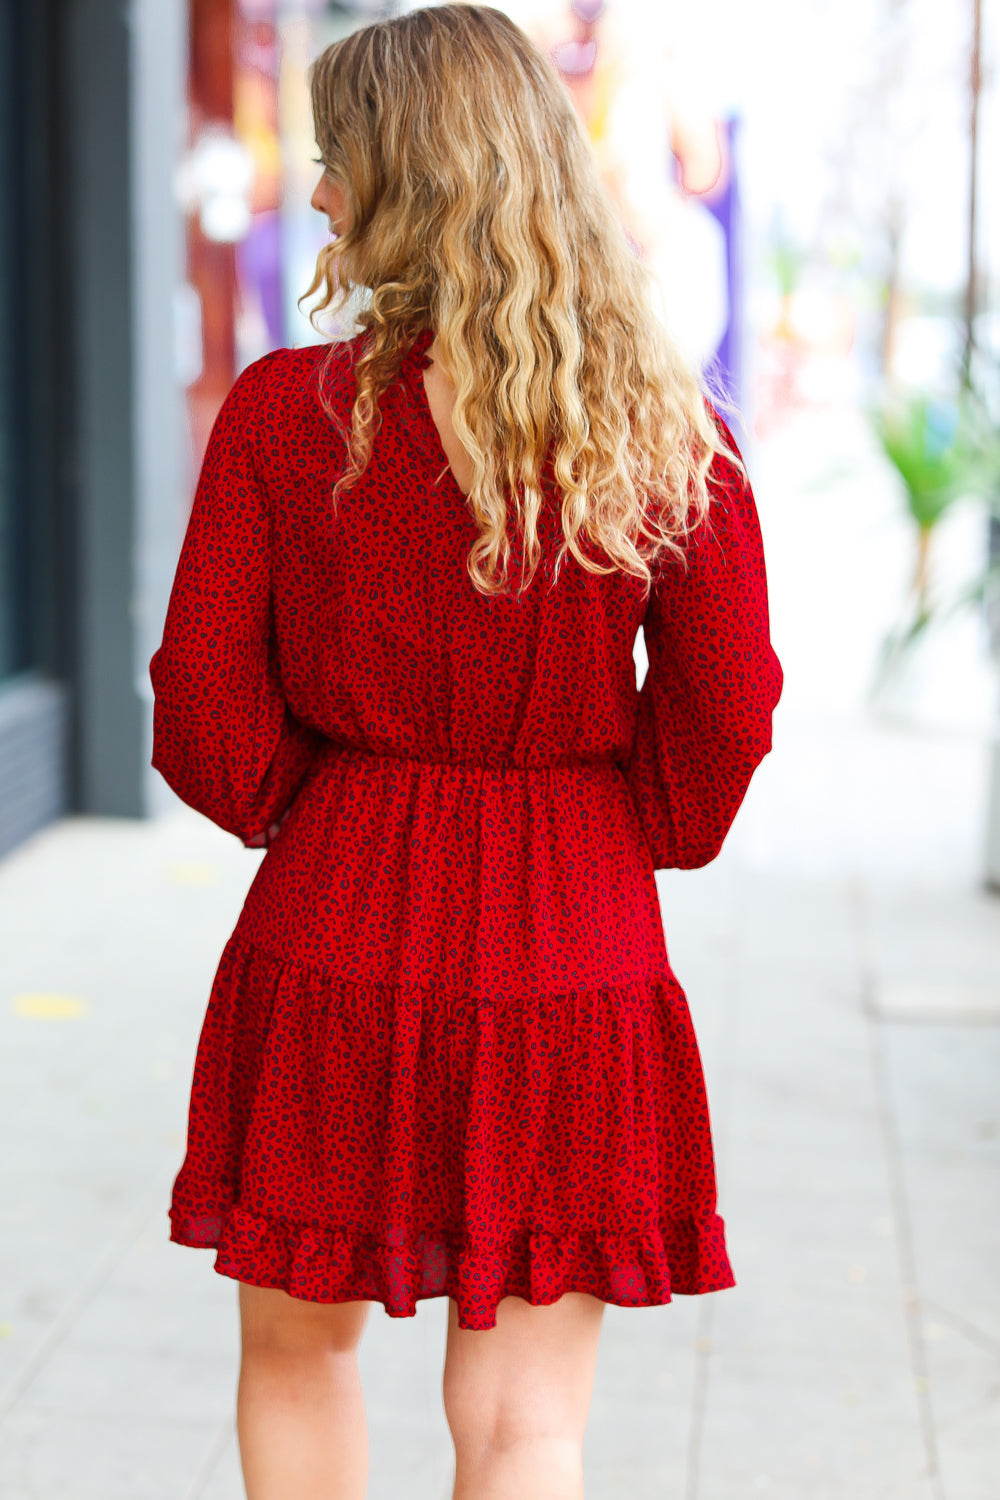 Simply Merry Tiered Dress in Burnt Red